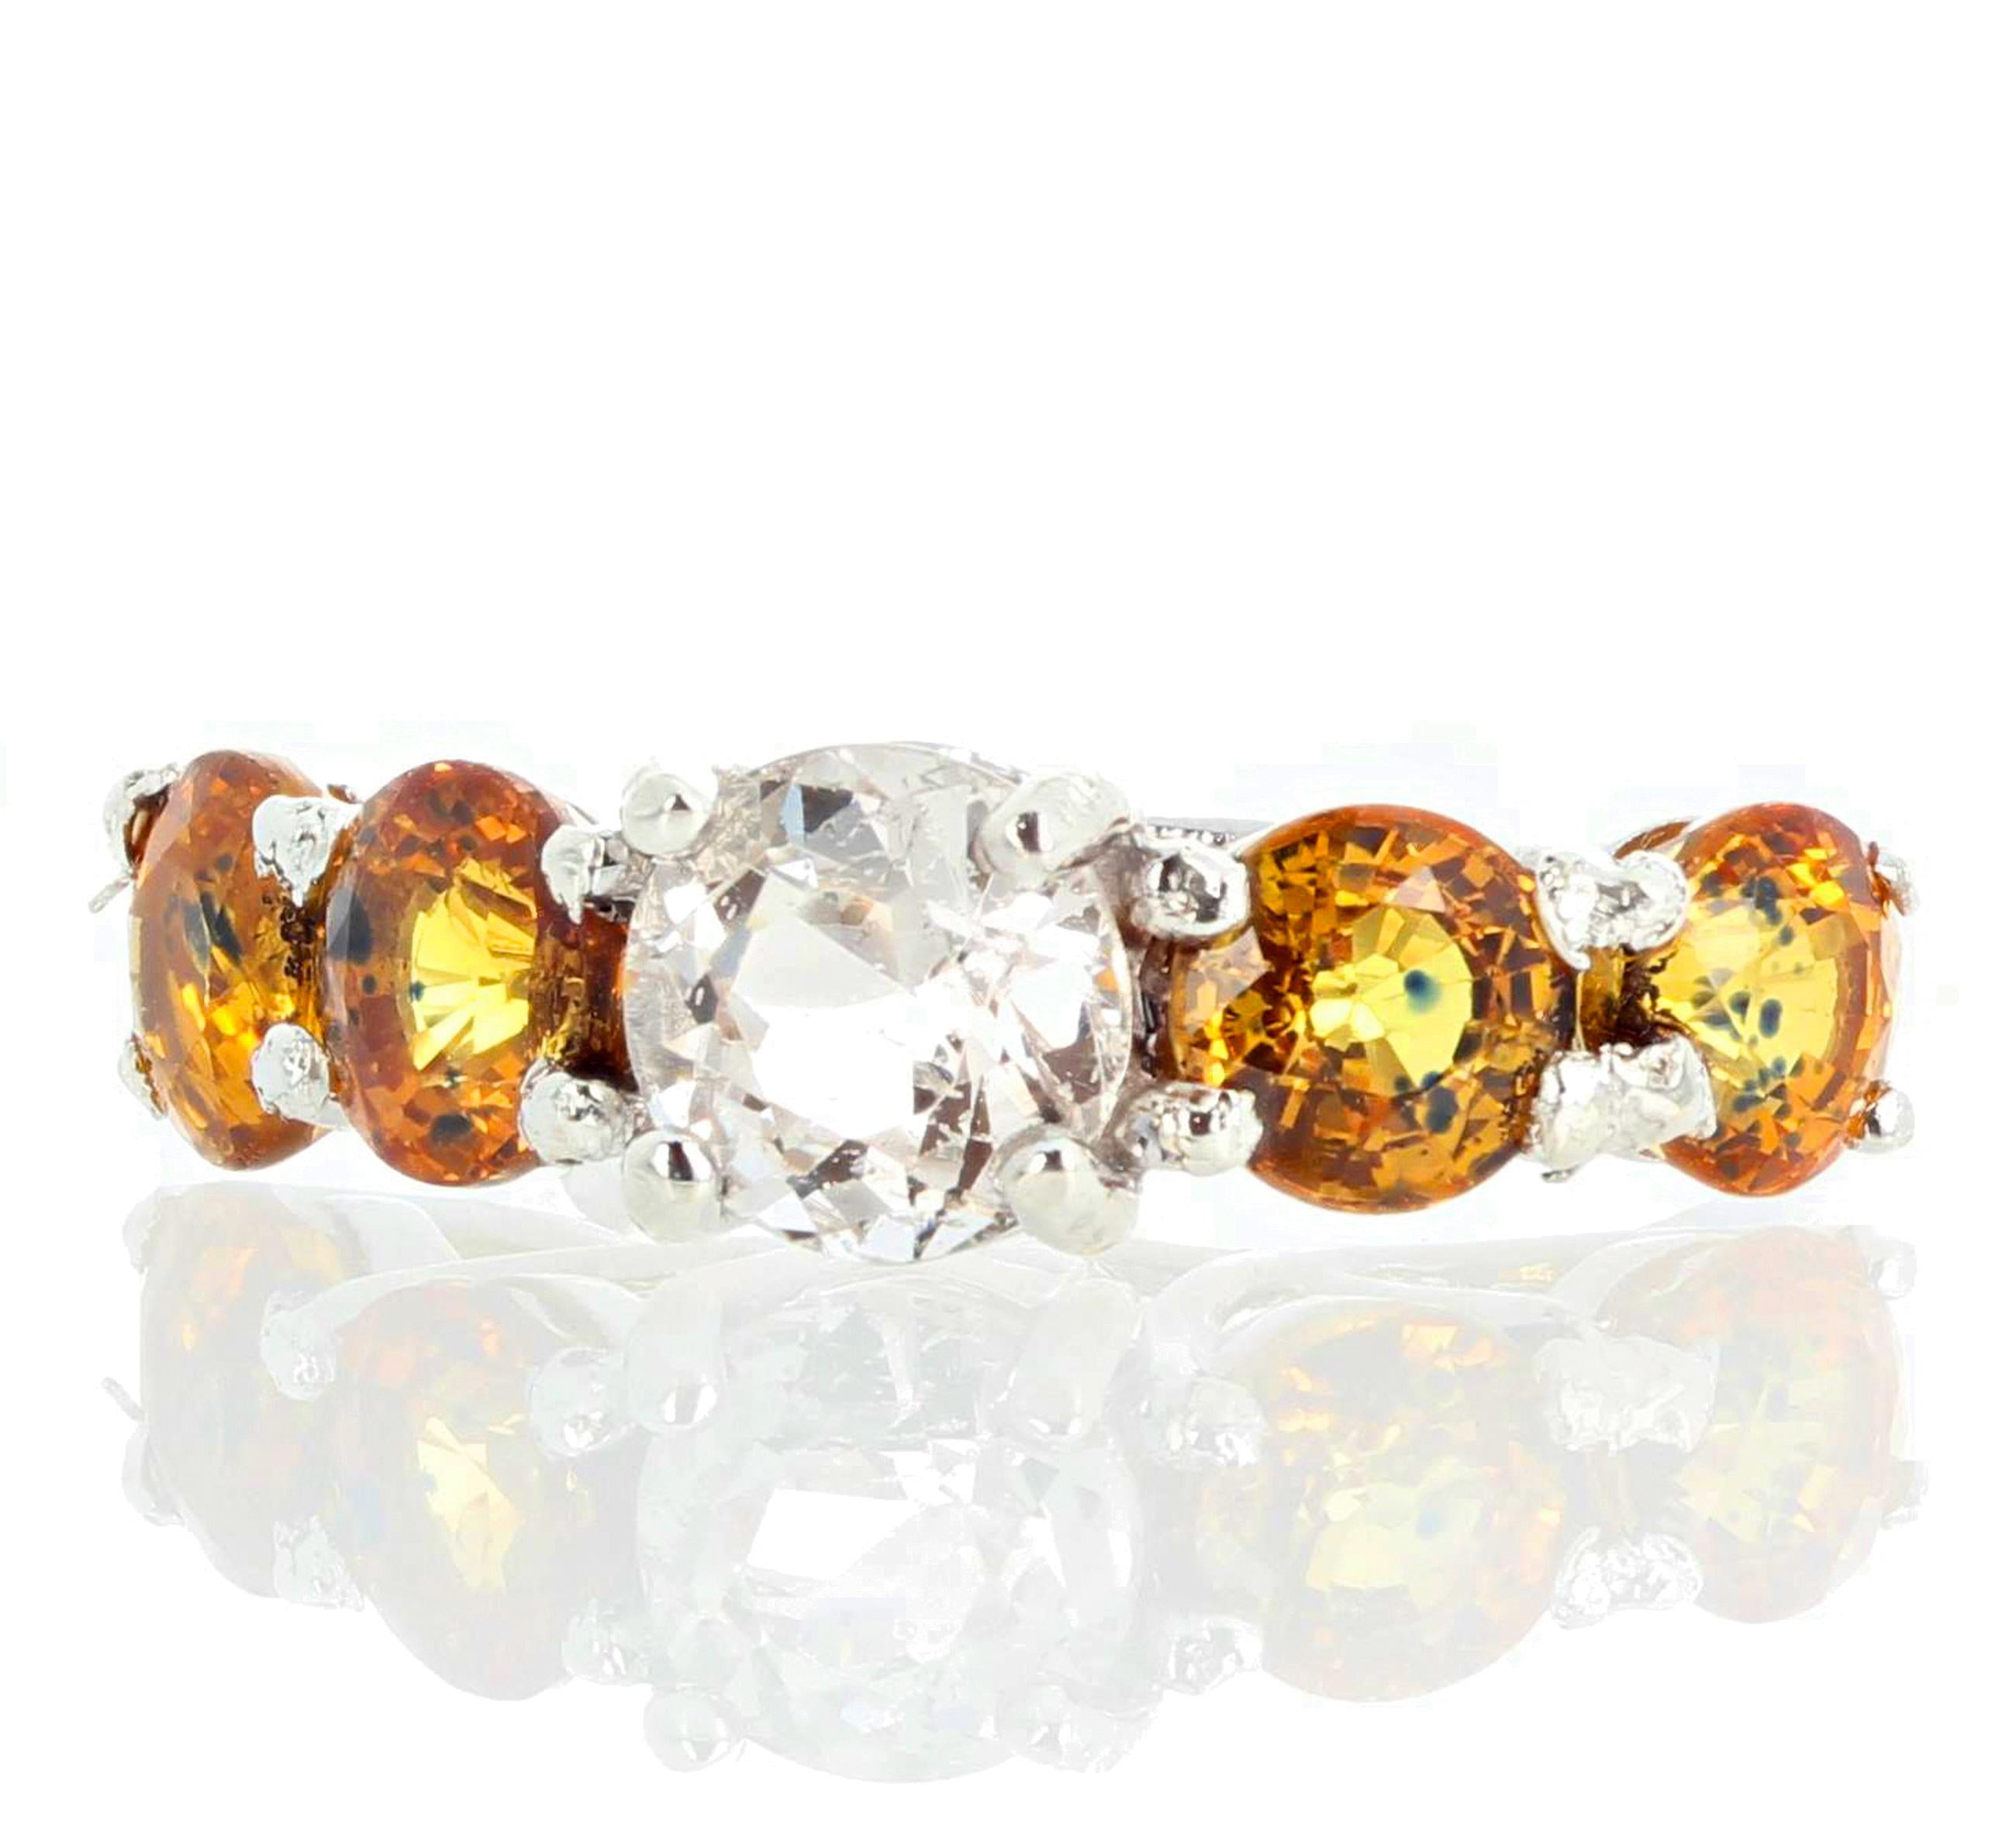 7.5 mm glittering natural white Cambodian Zircon is adorned with 4 5.8mm Songea fancy yellow color natural Sapphires set in a rhodium plated sterling silver ring size 7 (sizable).  More from this jeweler by putting Gemjunky into your 1stdibs search